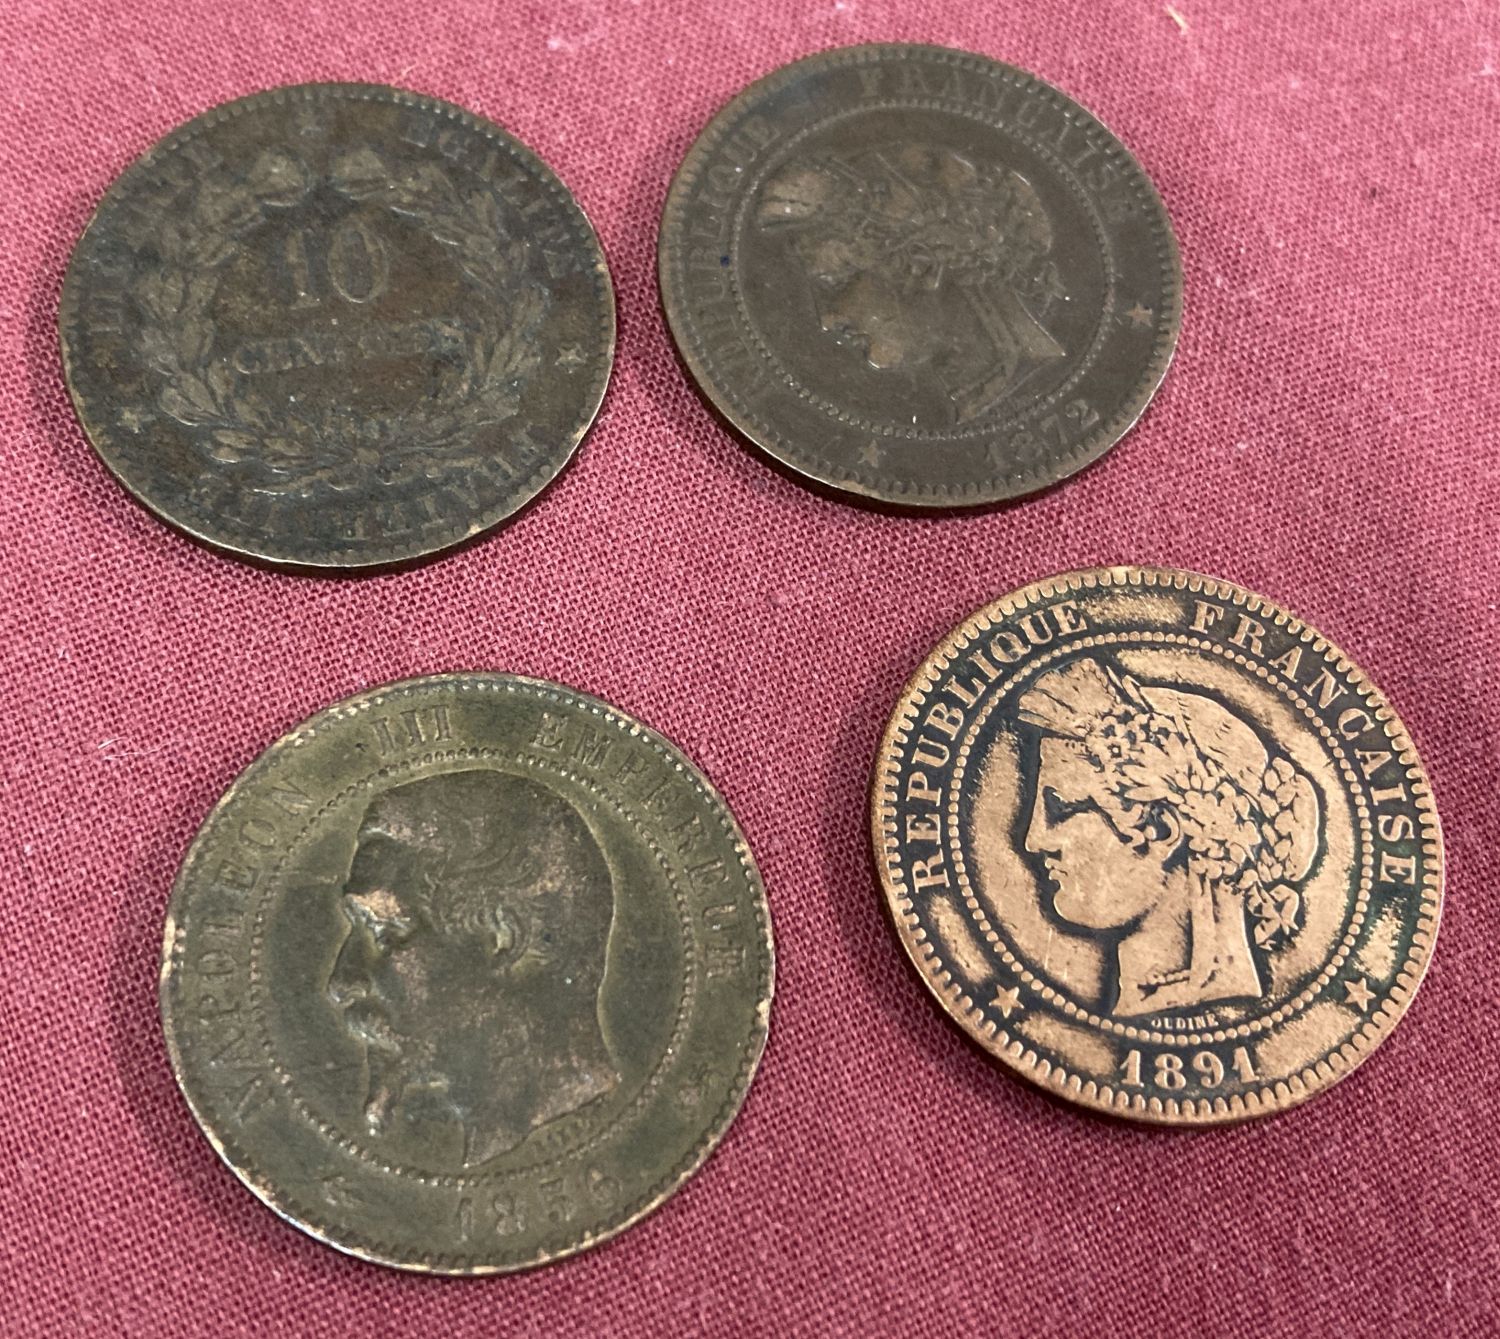 4 late 19th century French 10 centimes coins.